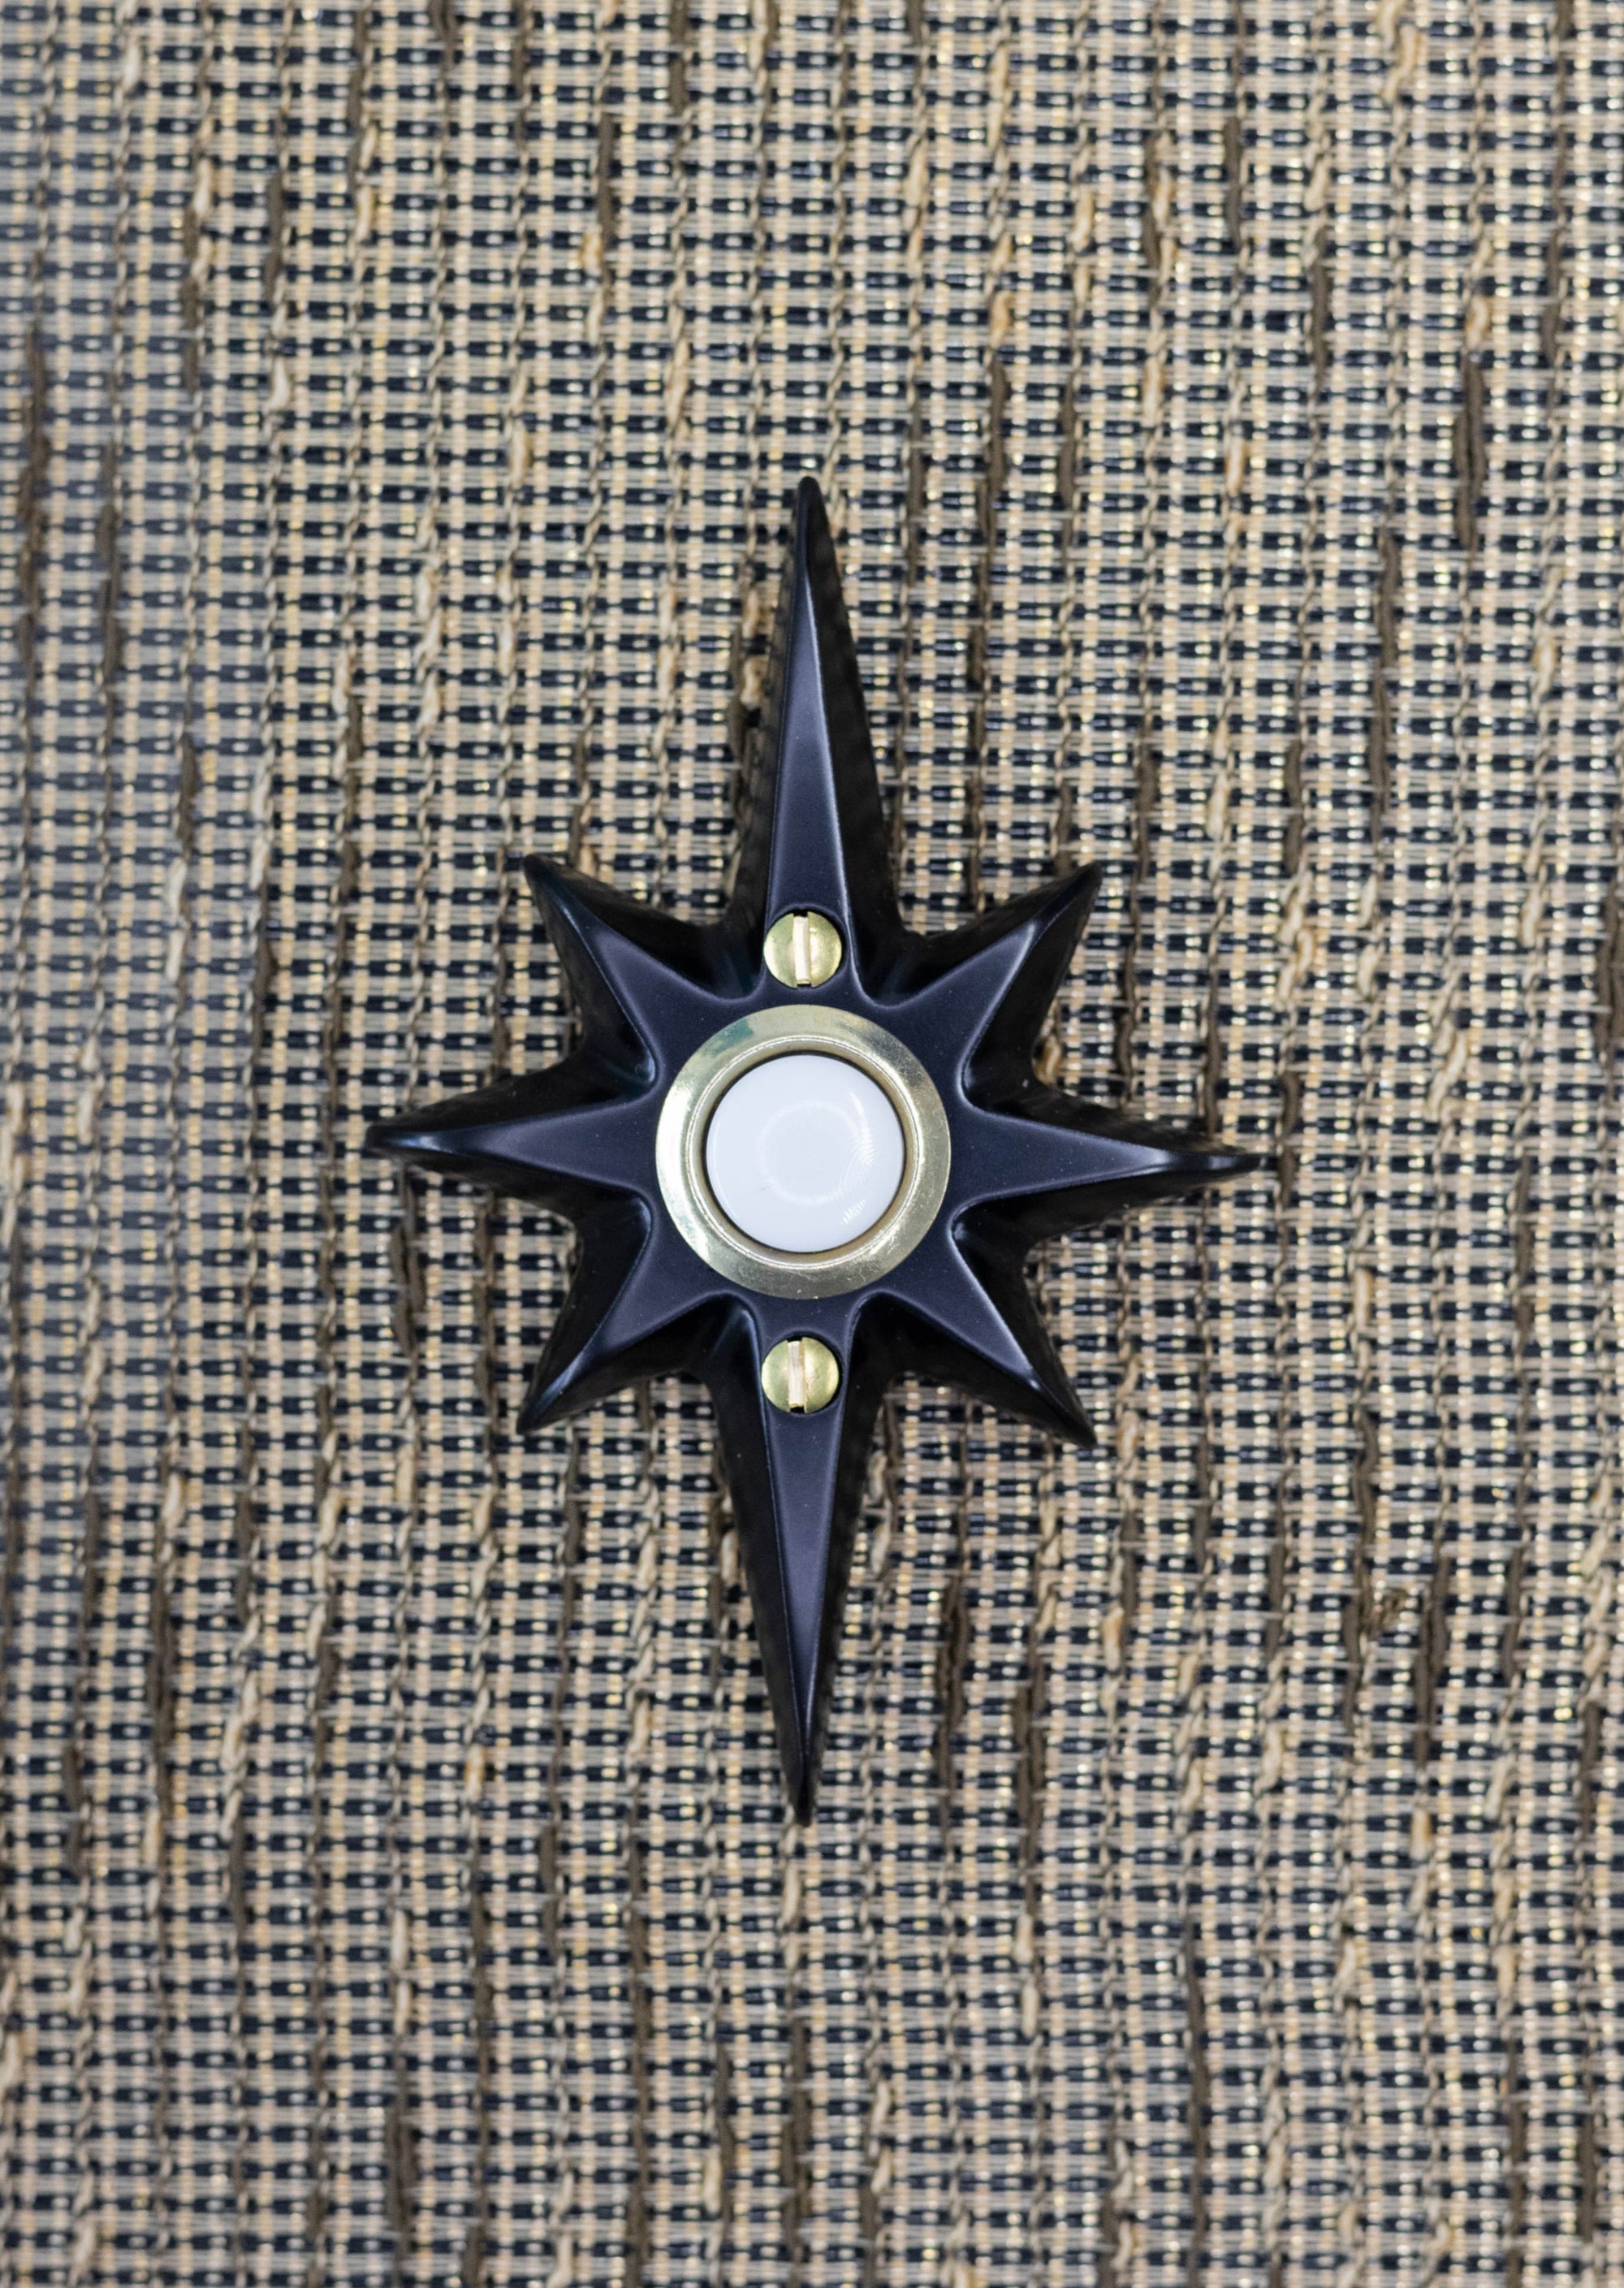 A small black powder coated cast aluminum starburst with a door bell in the center. The door bell is a white plastic with a gold metal rim. There are two gold screws, one above and below the doorbell. The powder coating is very smooth, and reflects a bit of light, but is not glossy.